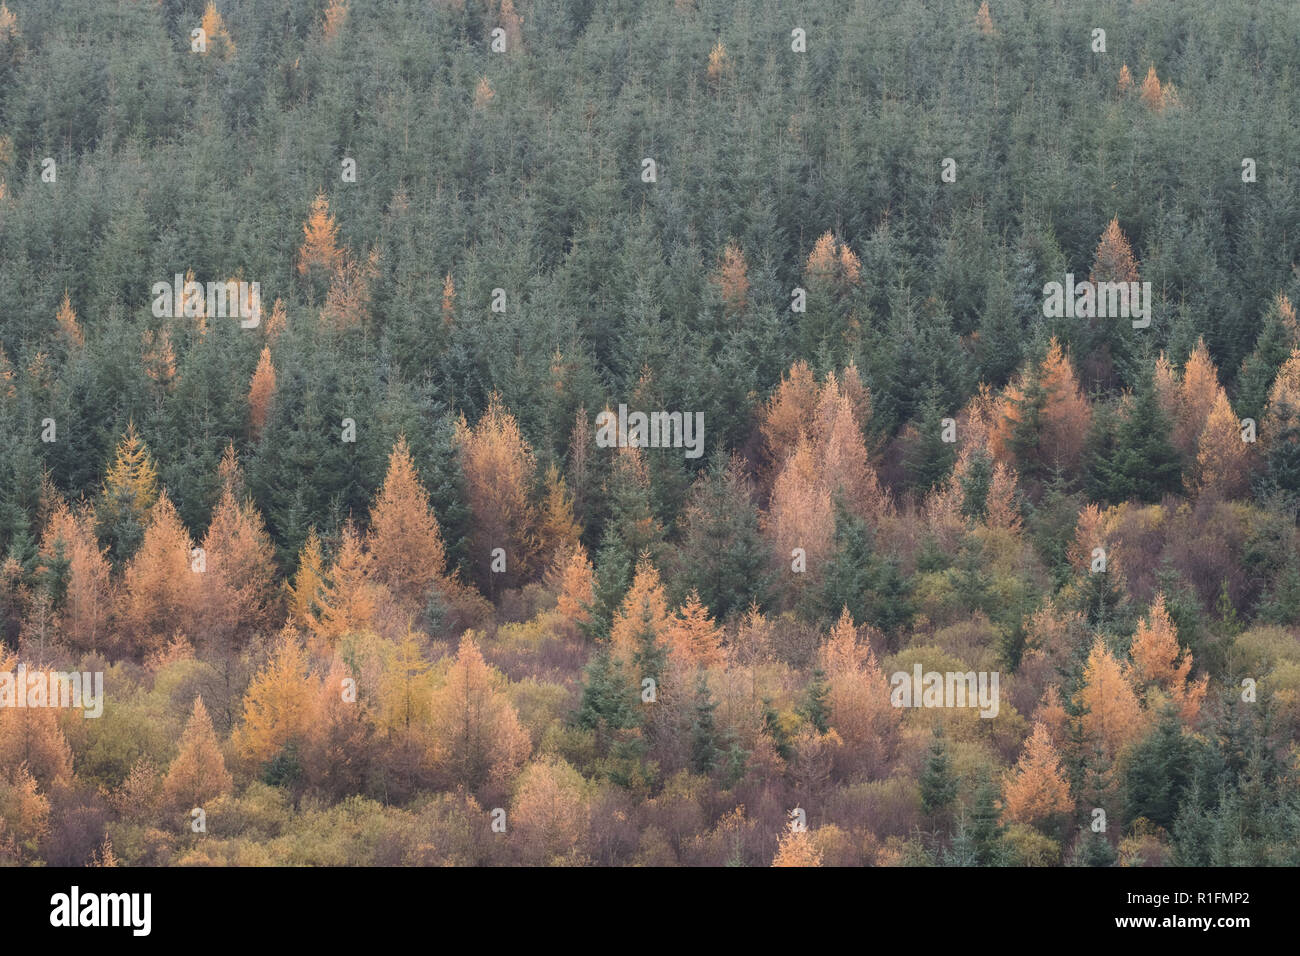 Llwyn Onn Reservoir, South Wales, UK.  12 November 2018.  UK weather: A chilly afternoon today, with autumn colours over the reservoir.  Credit: Andrew Bartlett/Alamy Live News Stock Photo